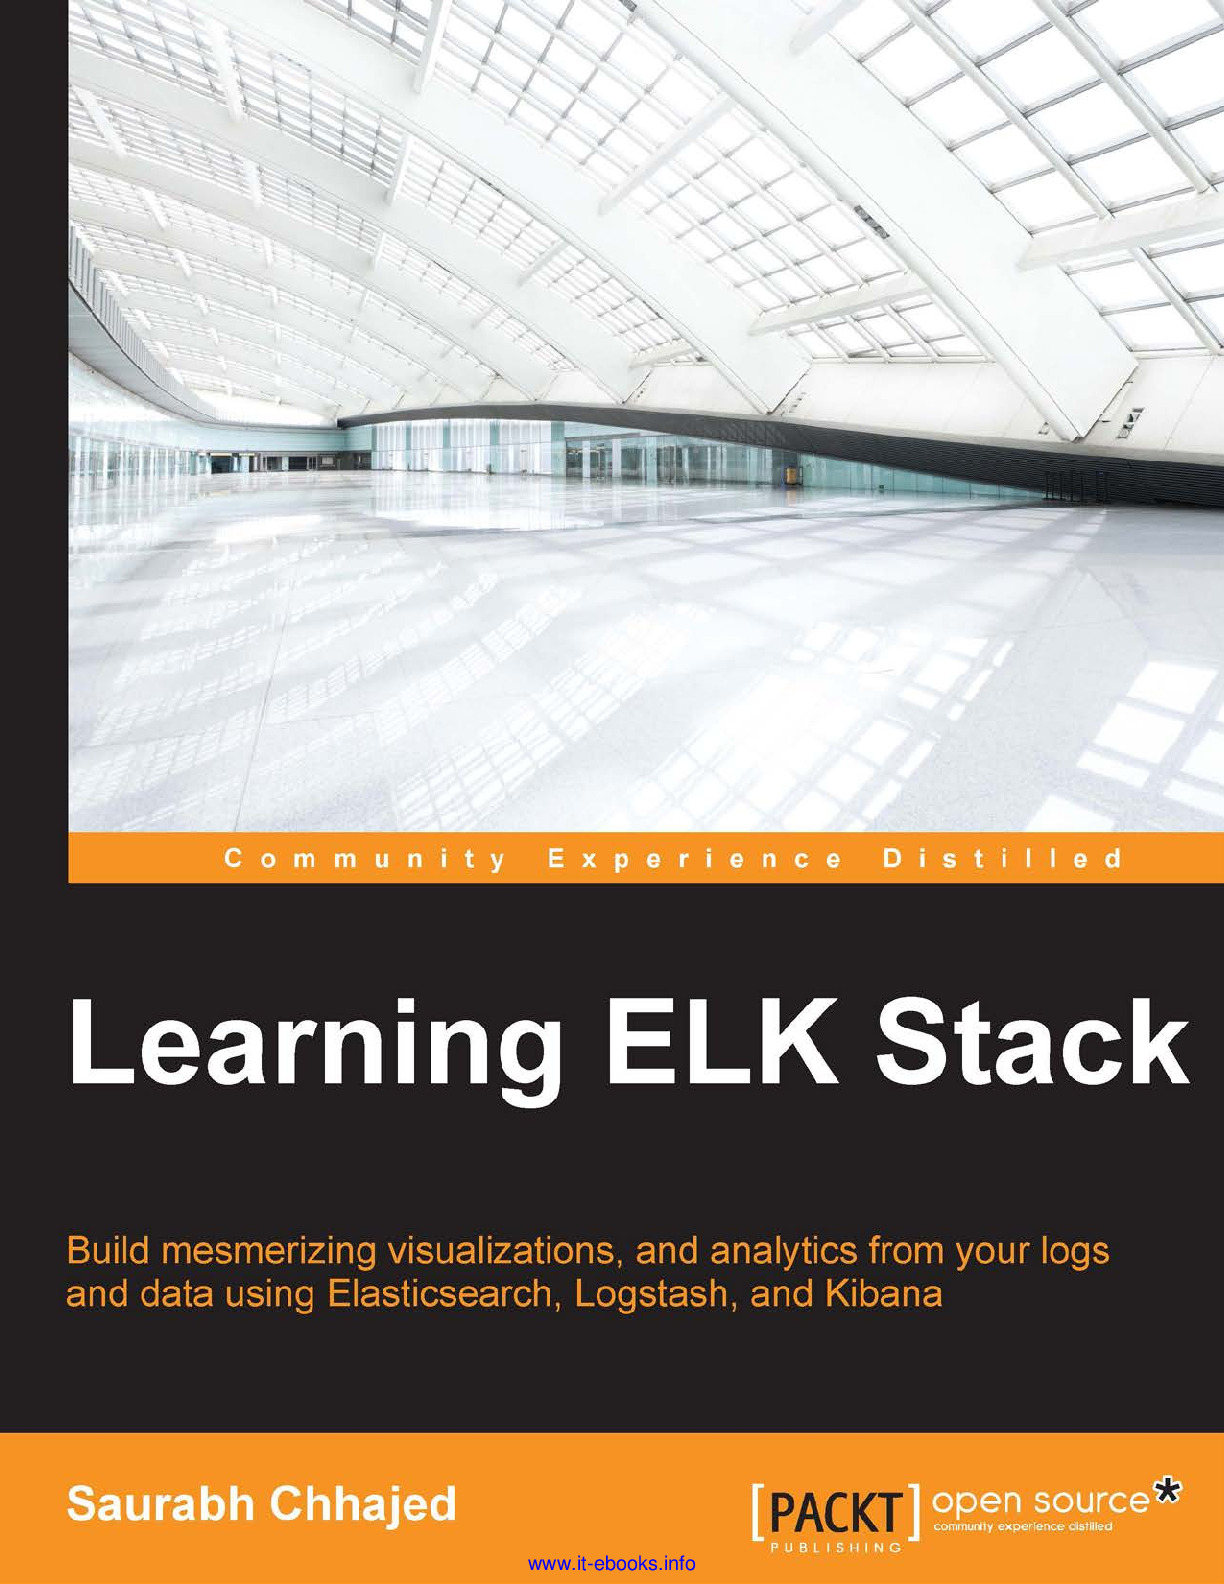 Learning ELK Stack – Build mesmerizing visualizations, analytics, and logs from your data using Elasticsearch, Logstash, and Kibana